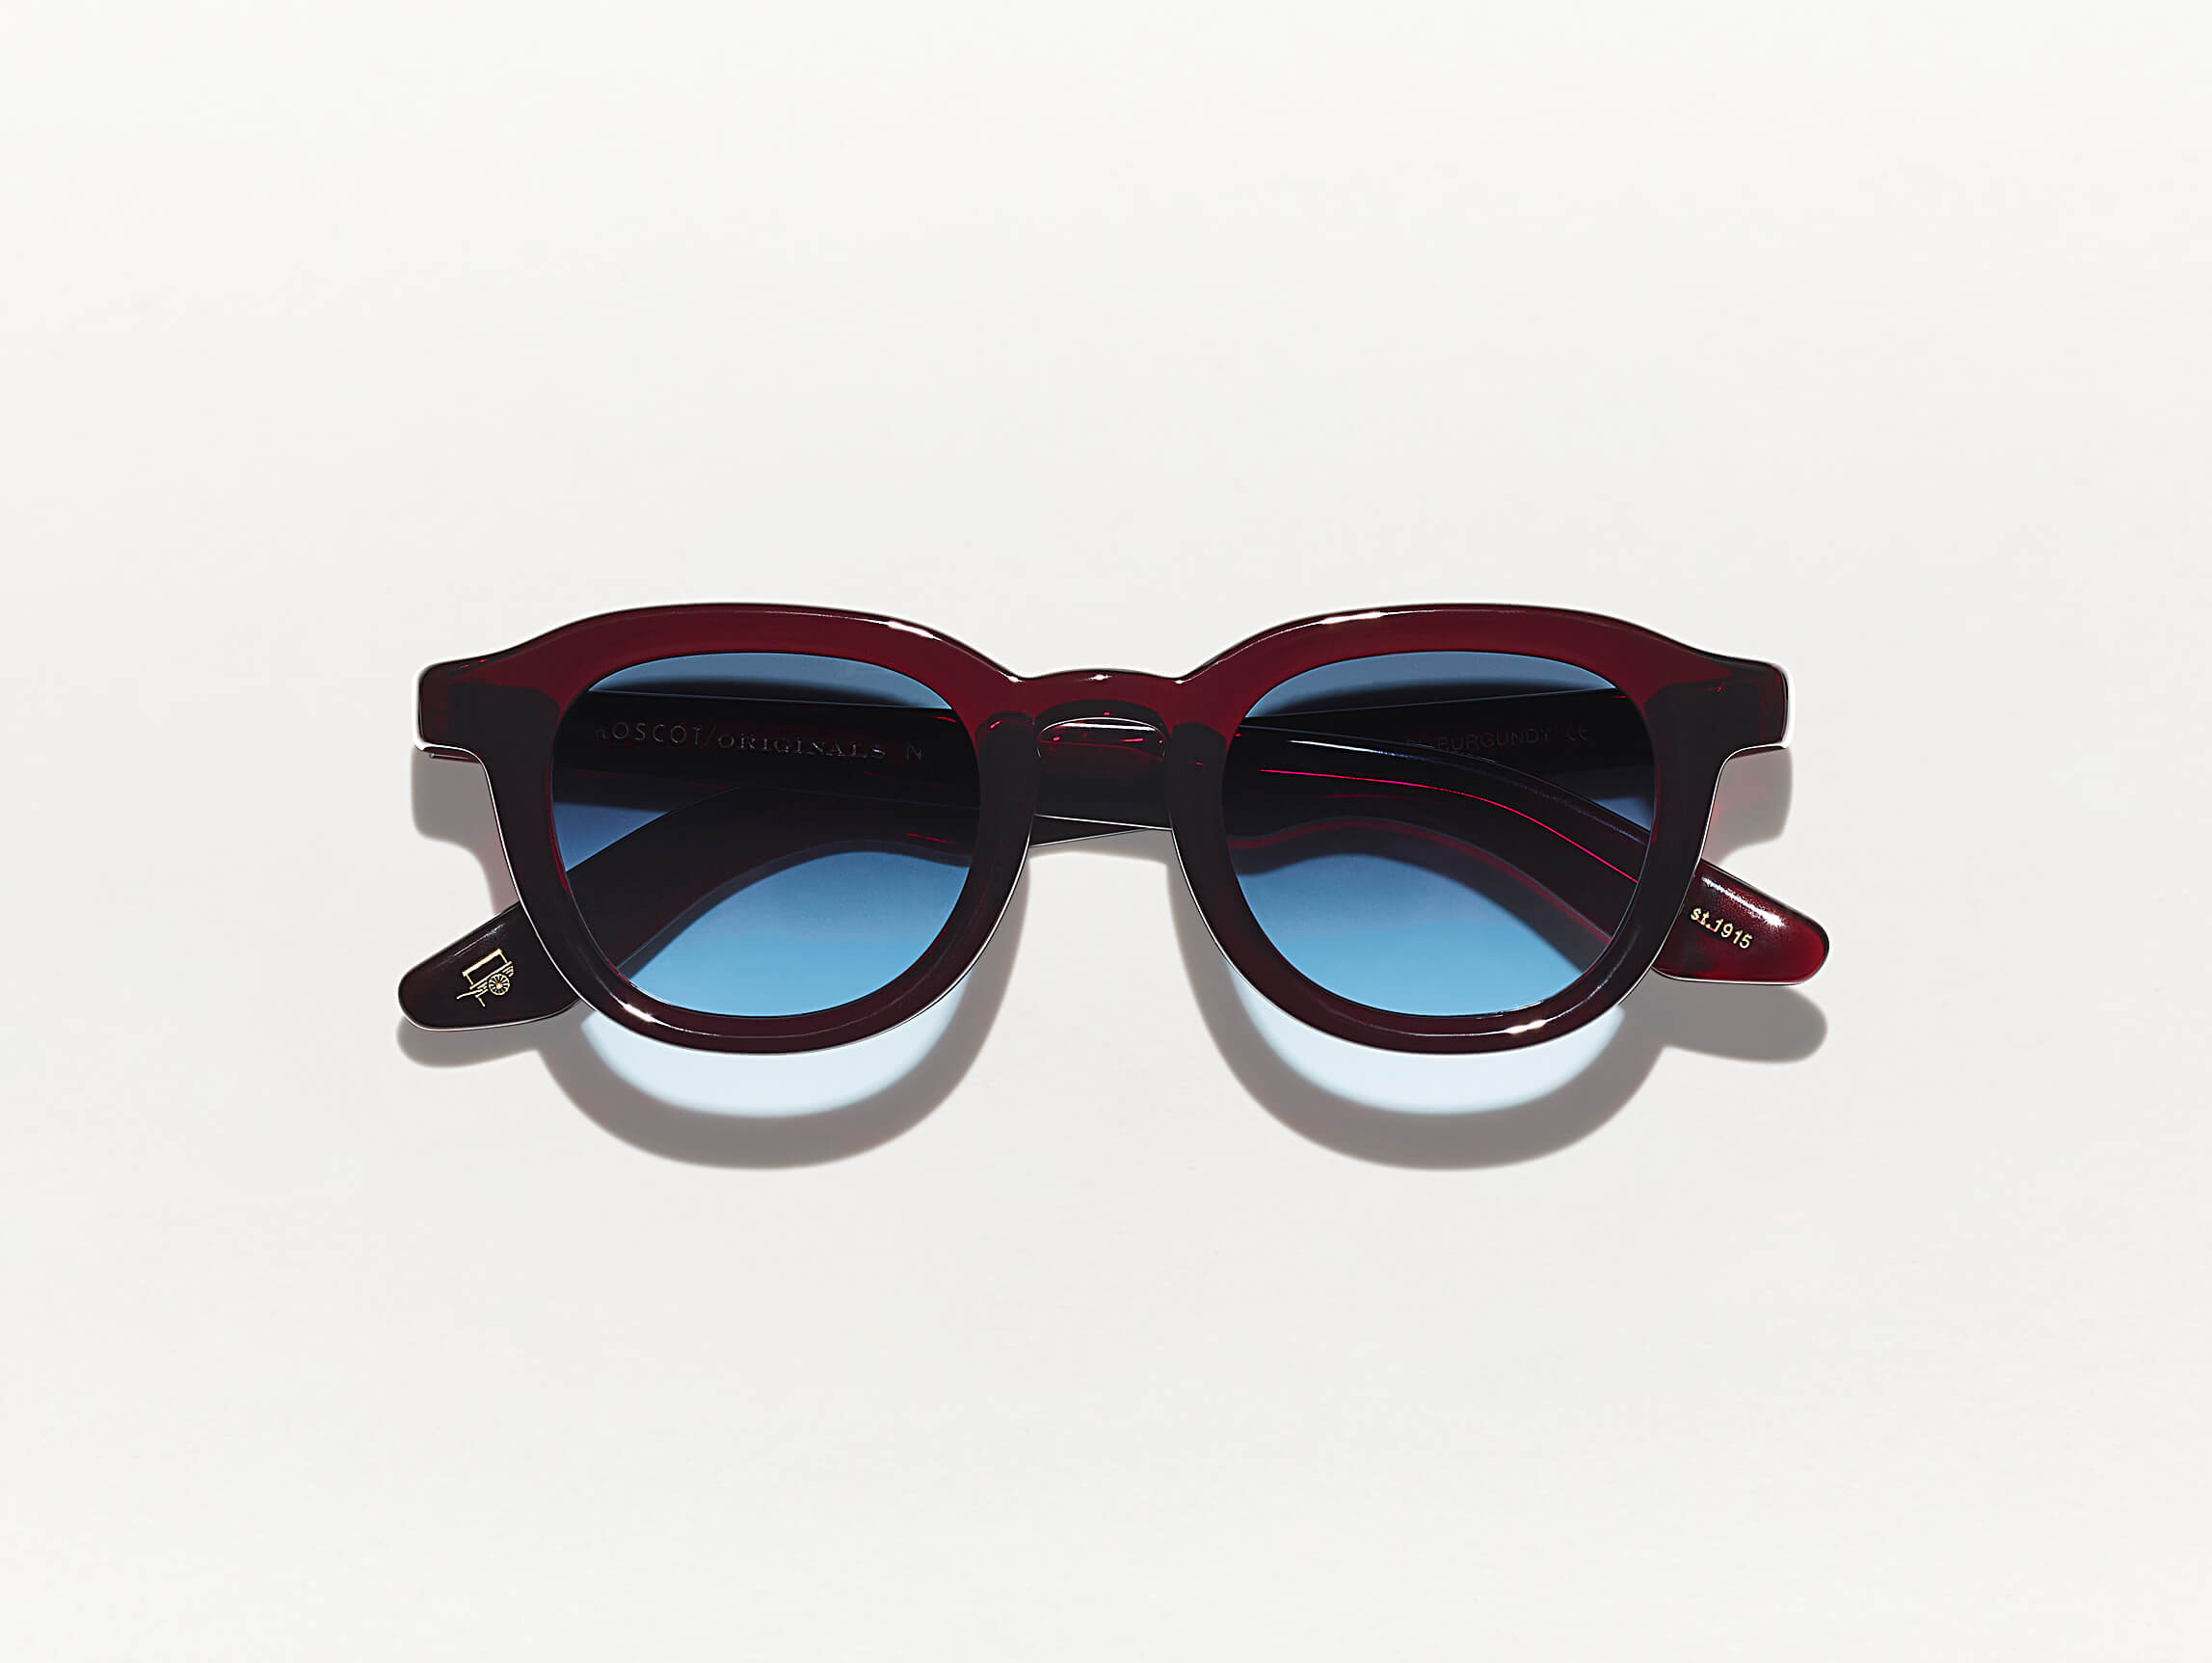 The DAHVEN in Burgundy with Denim Blue Tinted Lenses